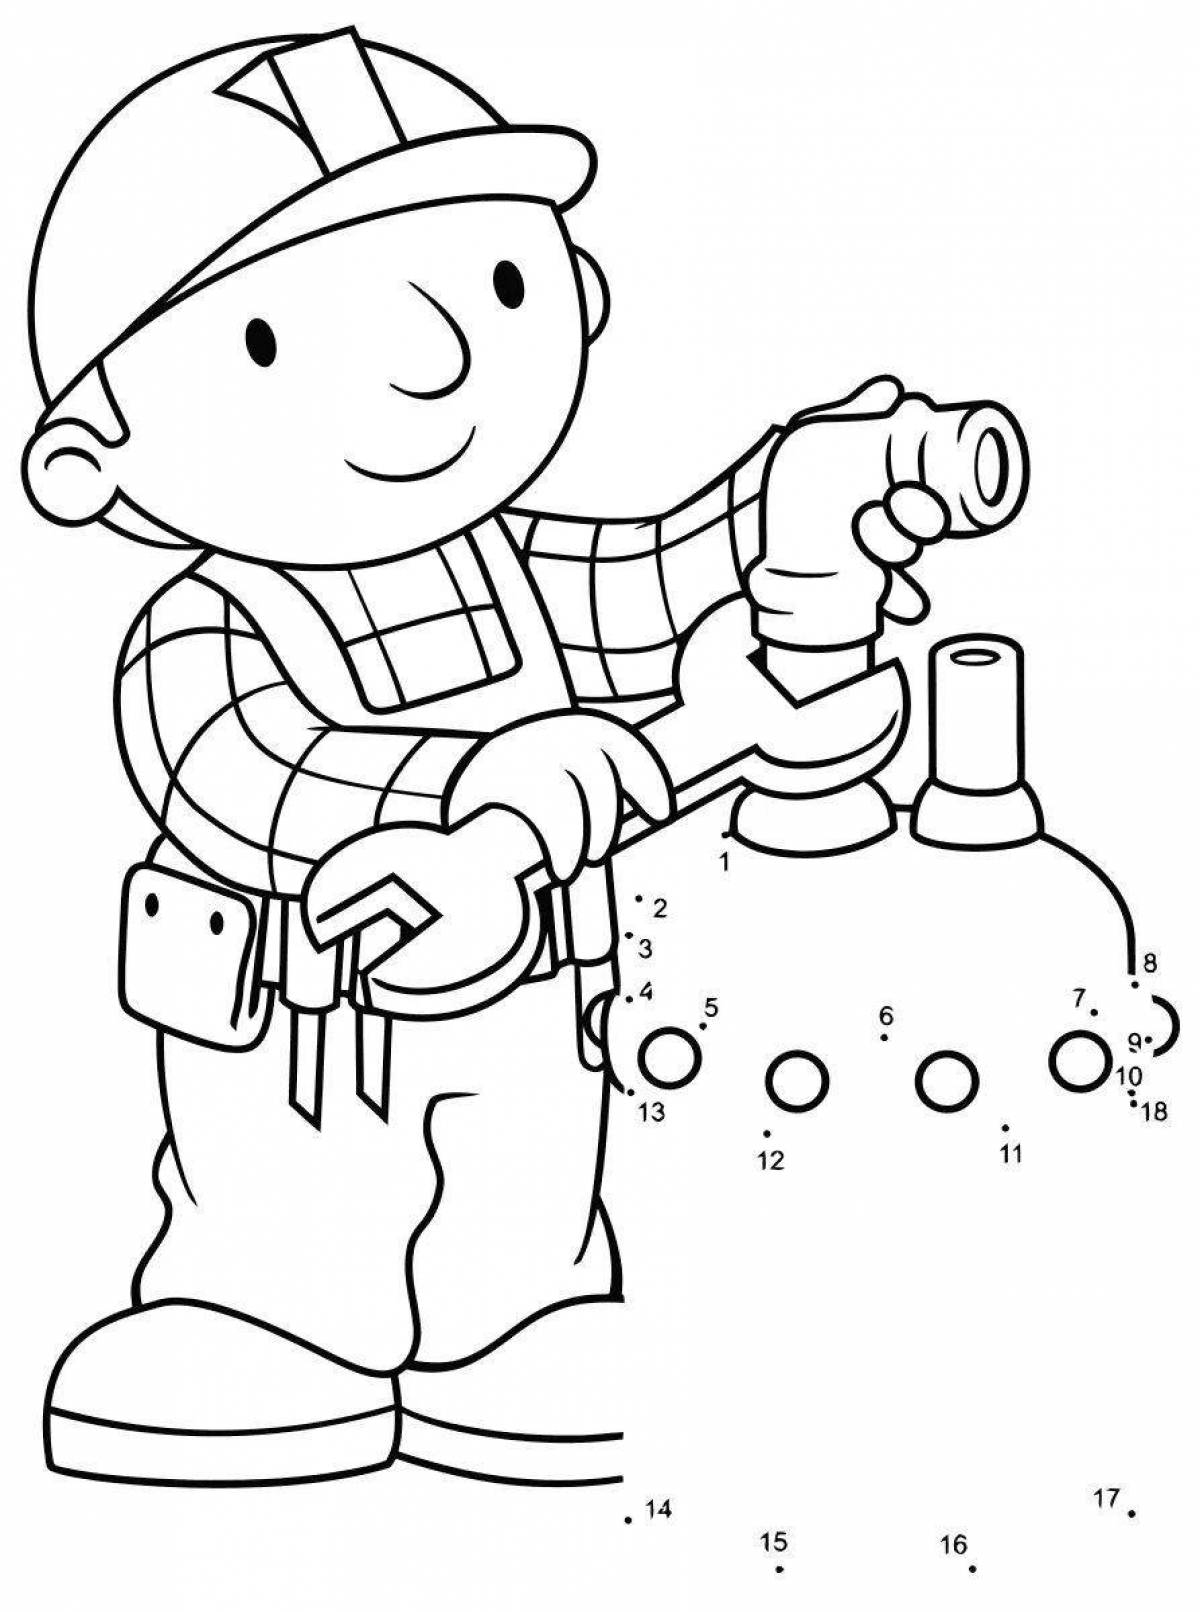 Coloring book funny building professions